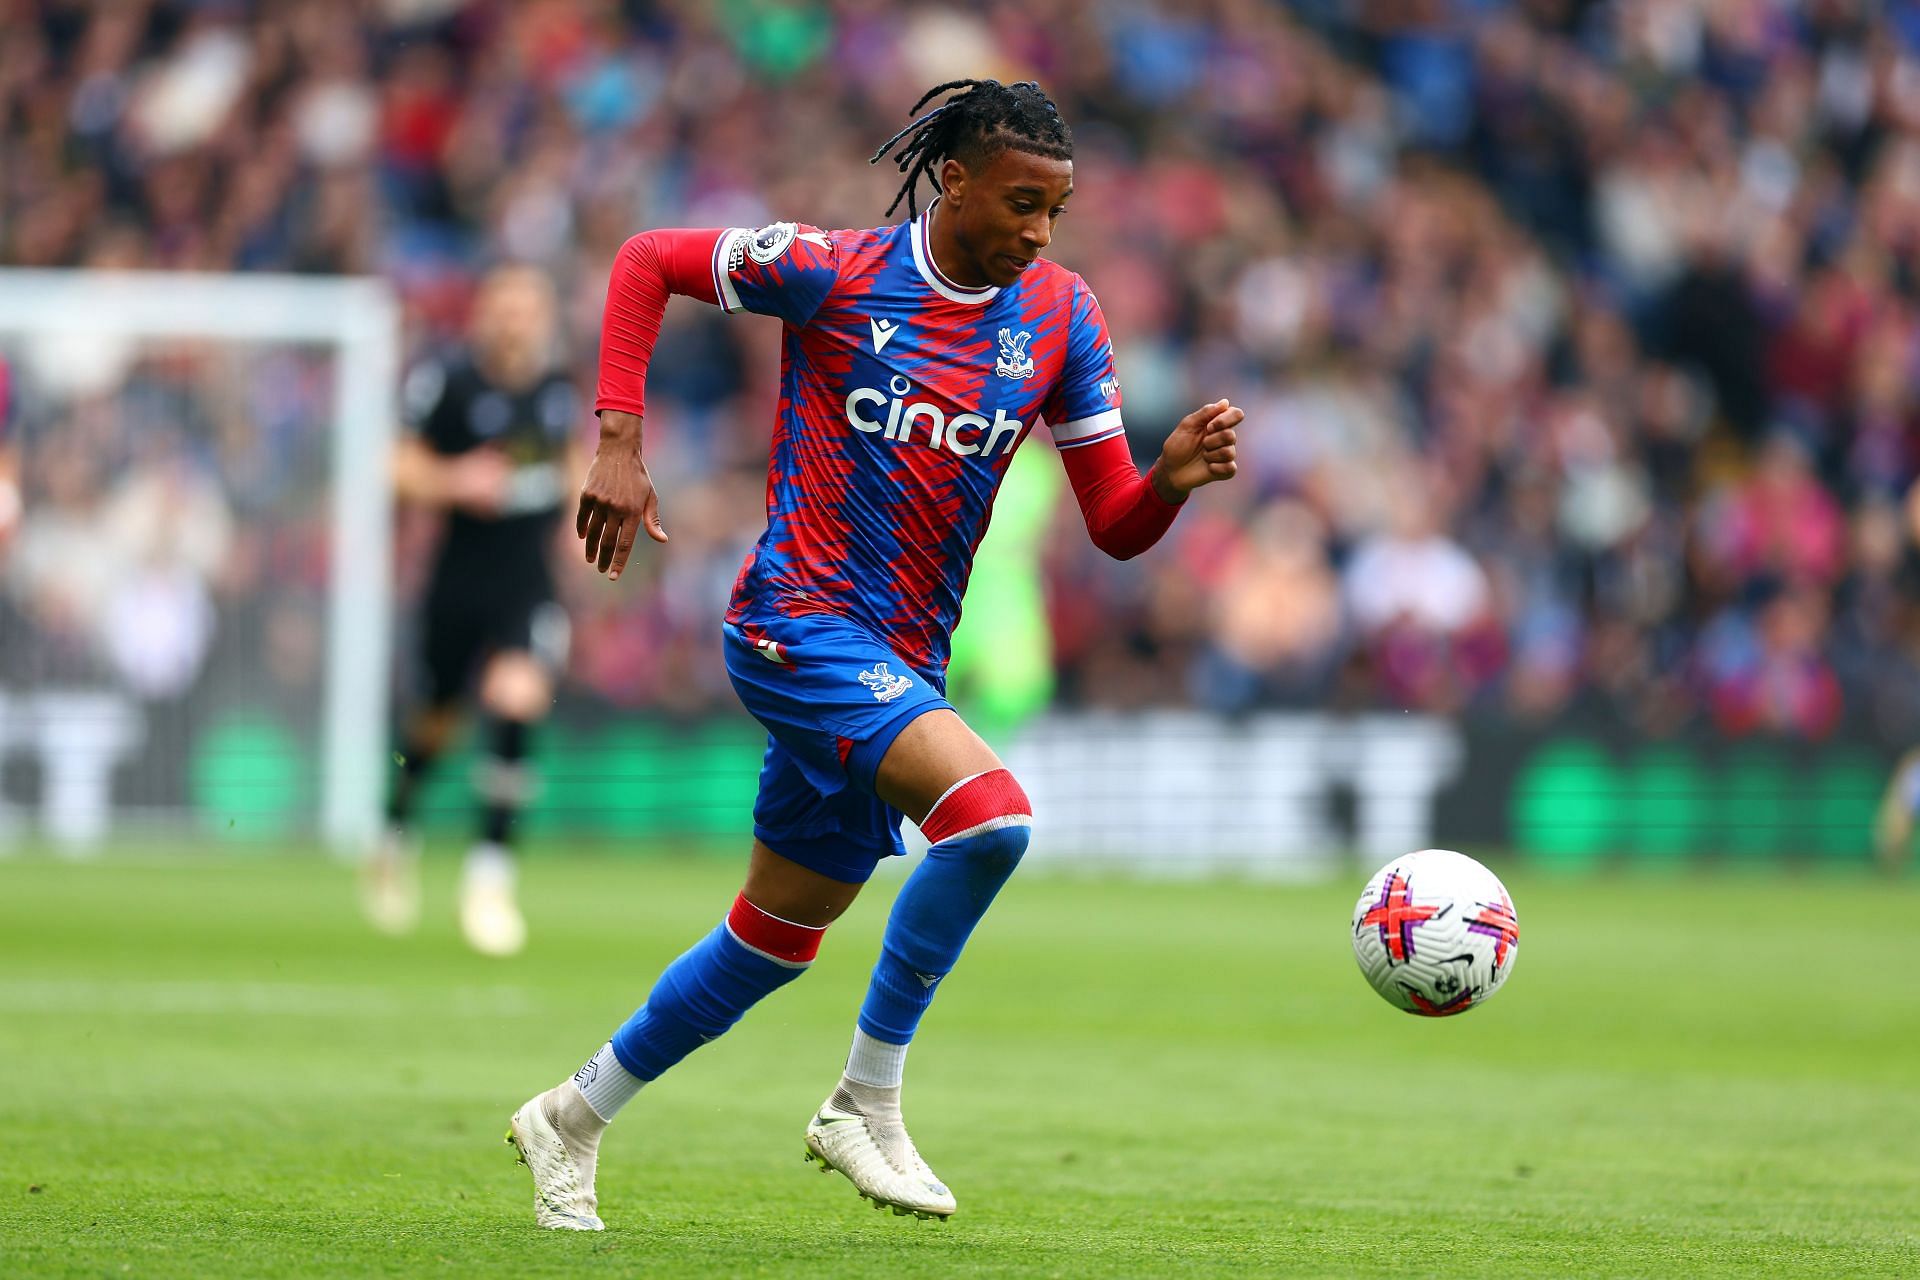 Crystal Palace are confident of keeping hold of Olise.